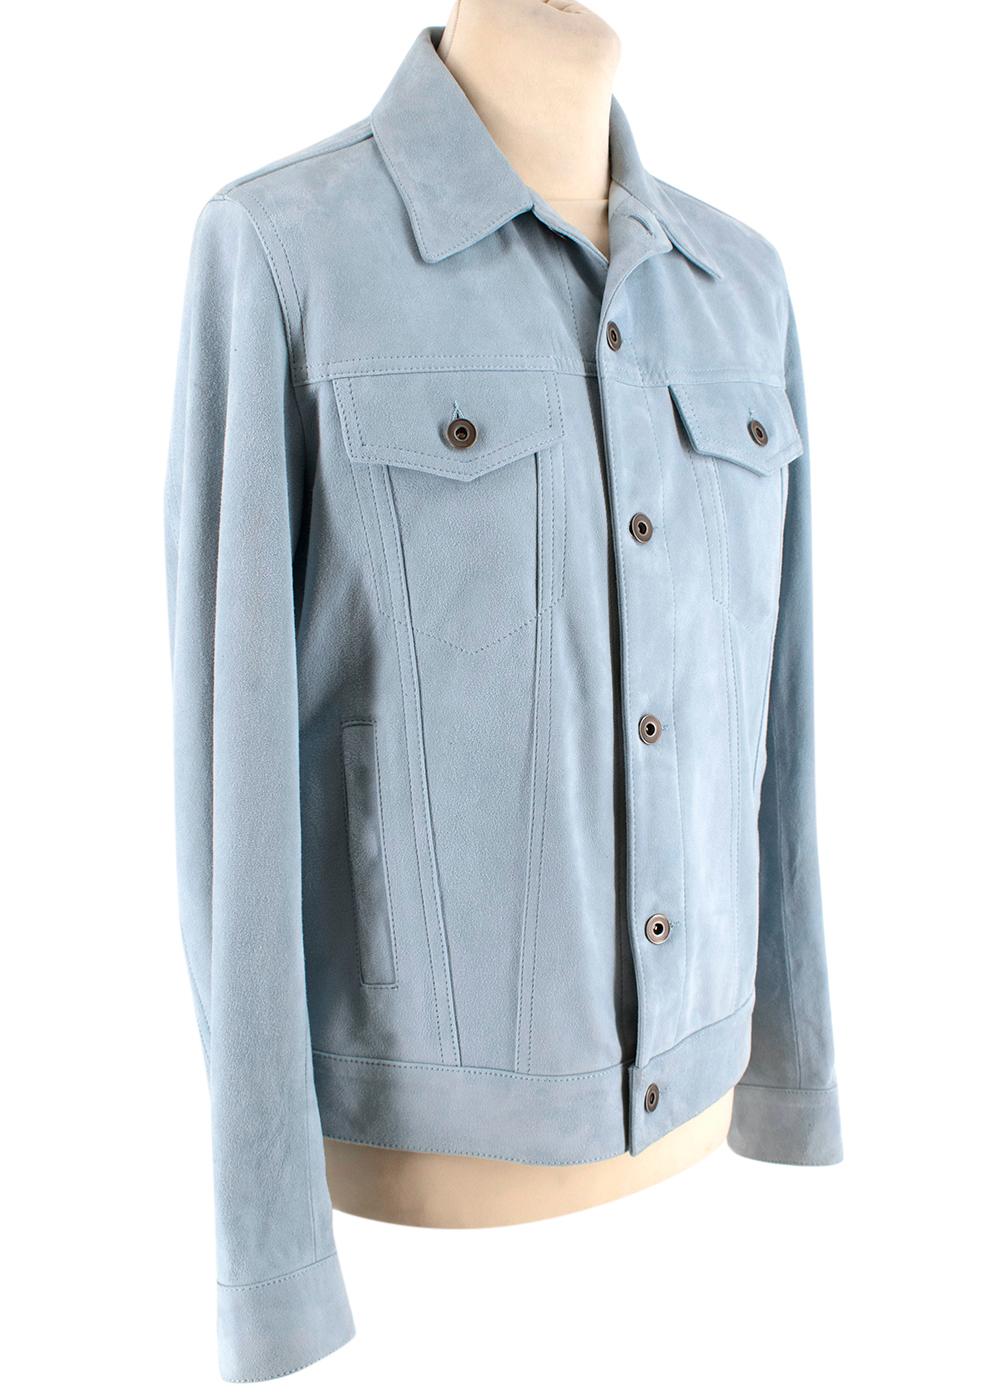 Valstar Sky Blue Suede Unlined Trucker Jacket 

Featuring buttoned cuffs, adjustable waist tabs, two chest flap pockets, two front welt pockets and an internal pocket.

- Made of soft suede 
- Beautiful blue hue 
- Classic cut 
- Versatile timeless